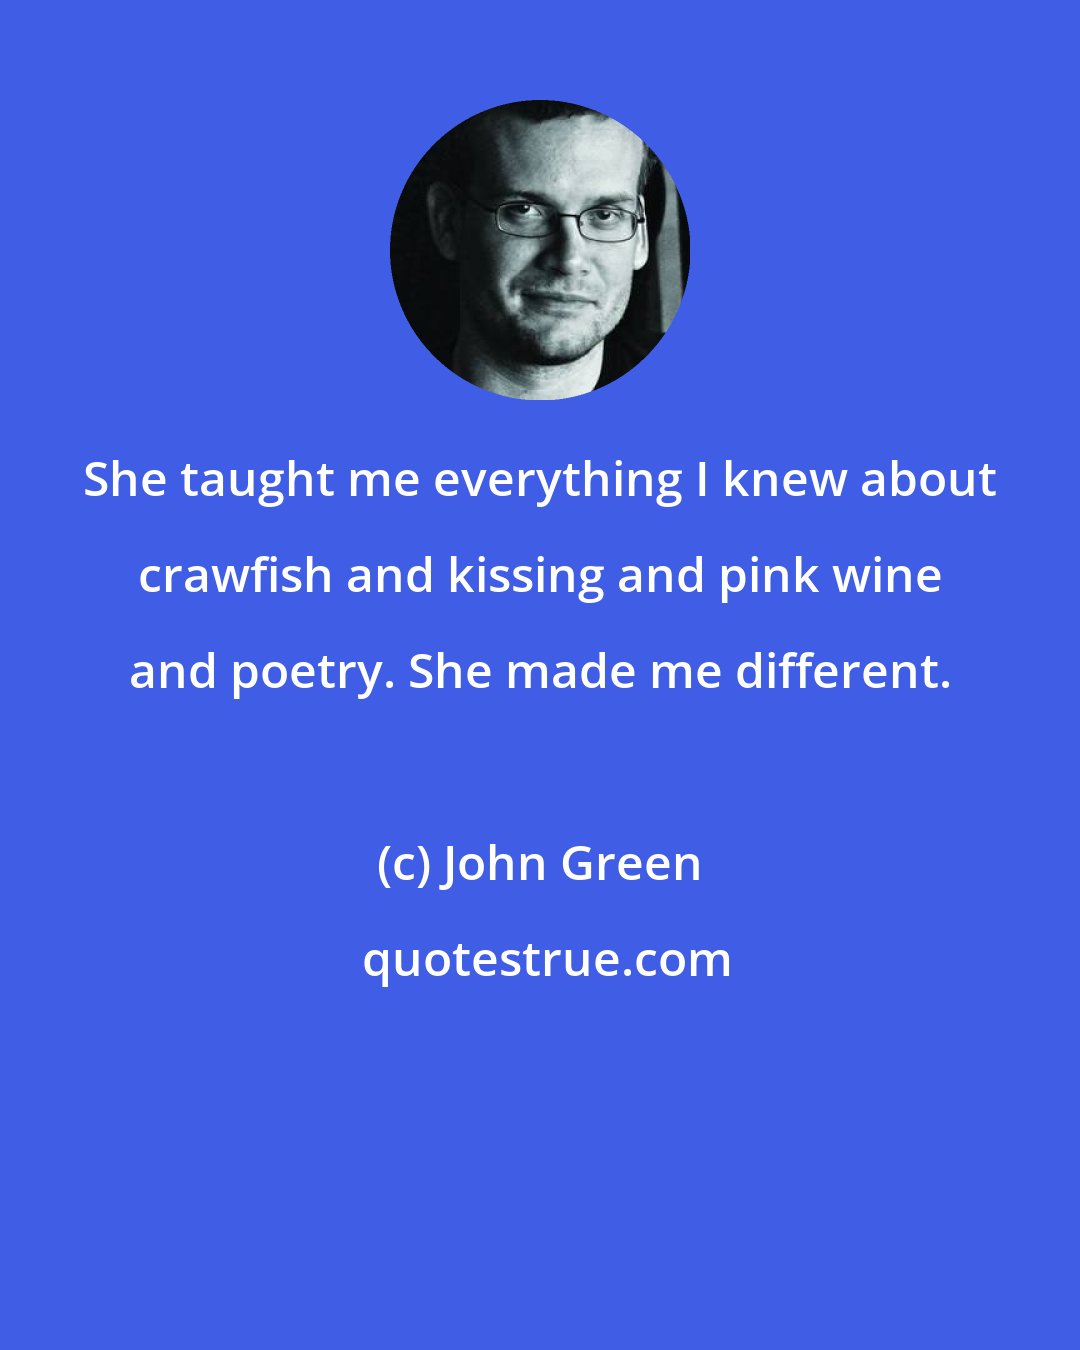 John Green: She taught me everything I knew about crawfish and kissing and pink wine and poetry. She made me different.